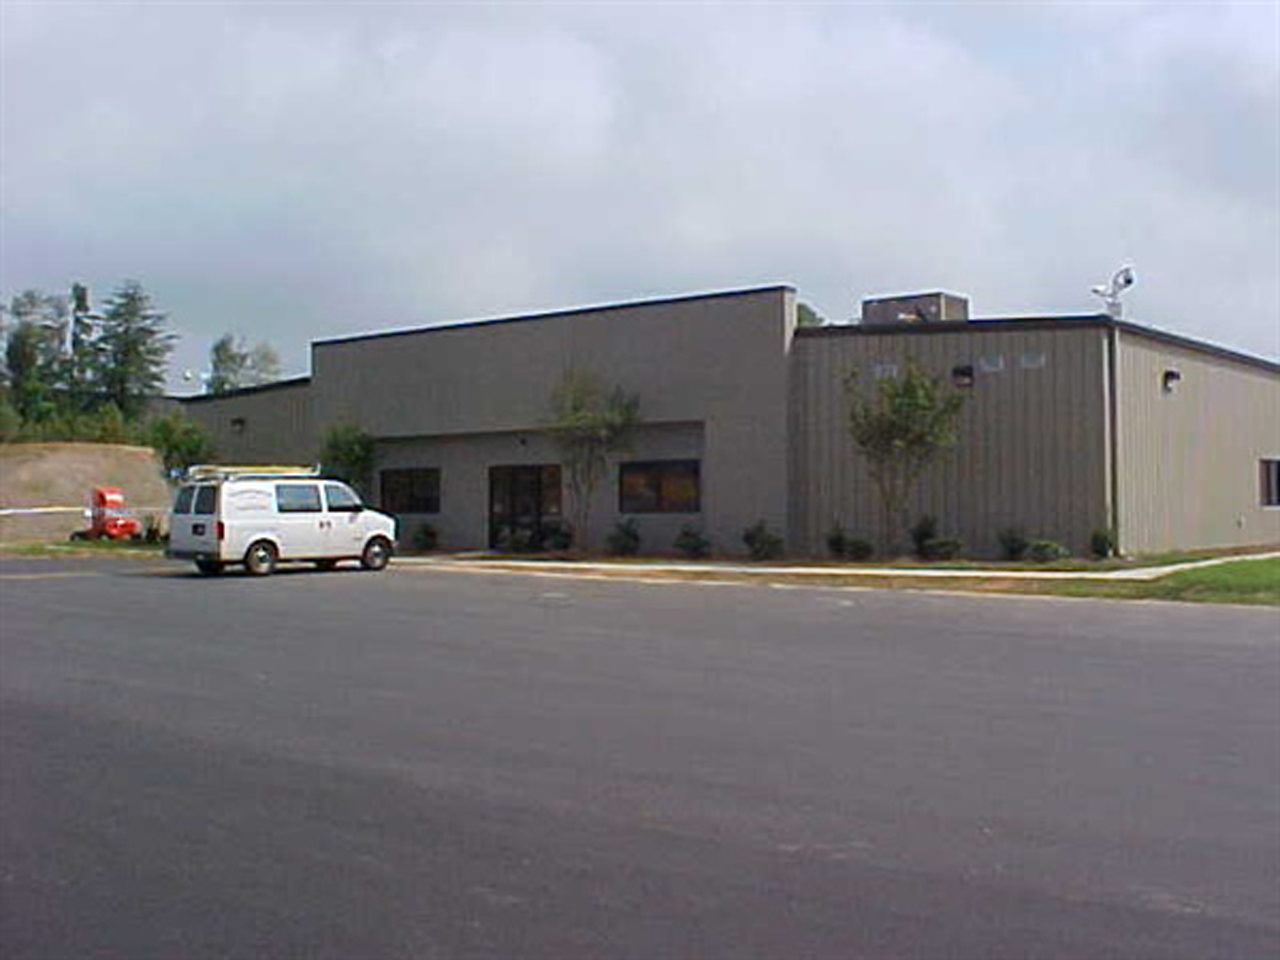 Exterior building and parking lot of Fed EX office